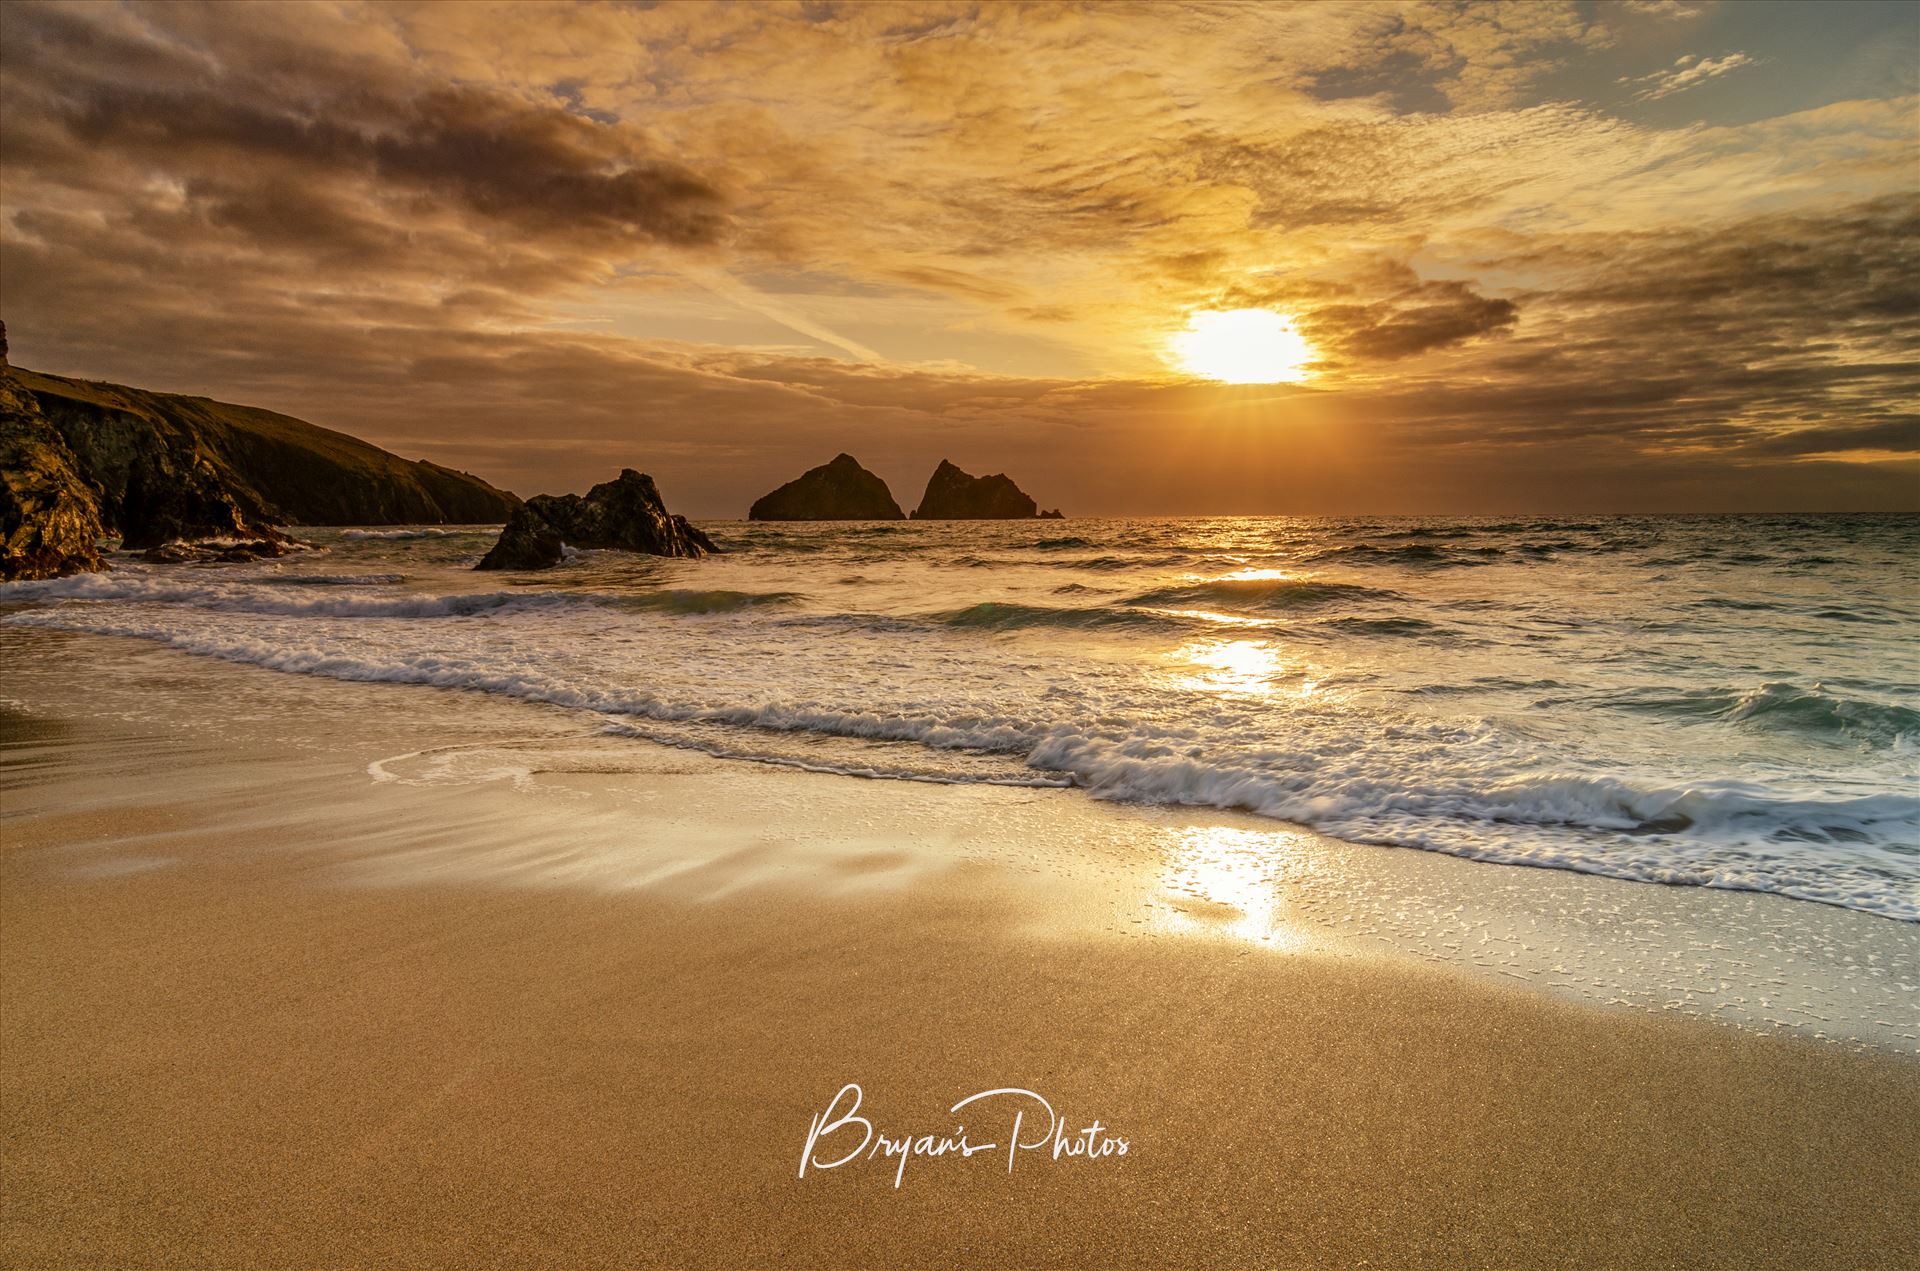 Holywell Bay A photograph of Holywell Bay Cornwall taken as the sun sets on a summer evening by Bryans Photos